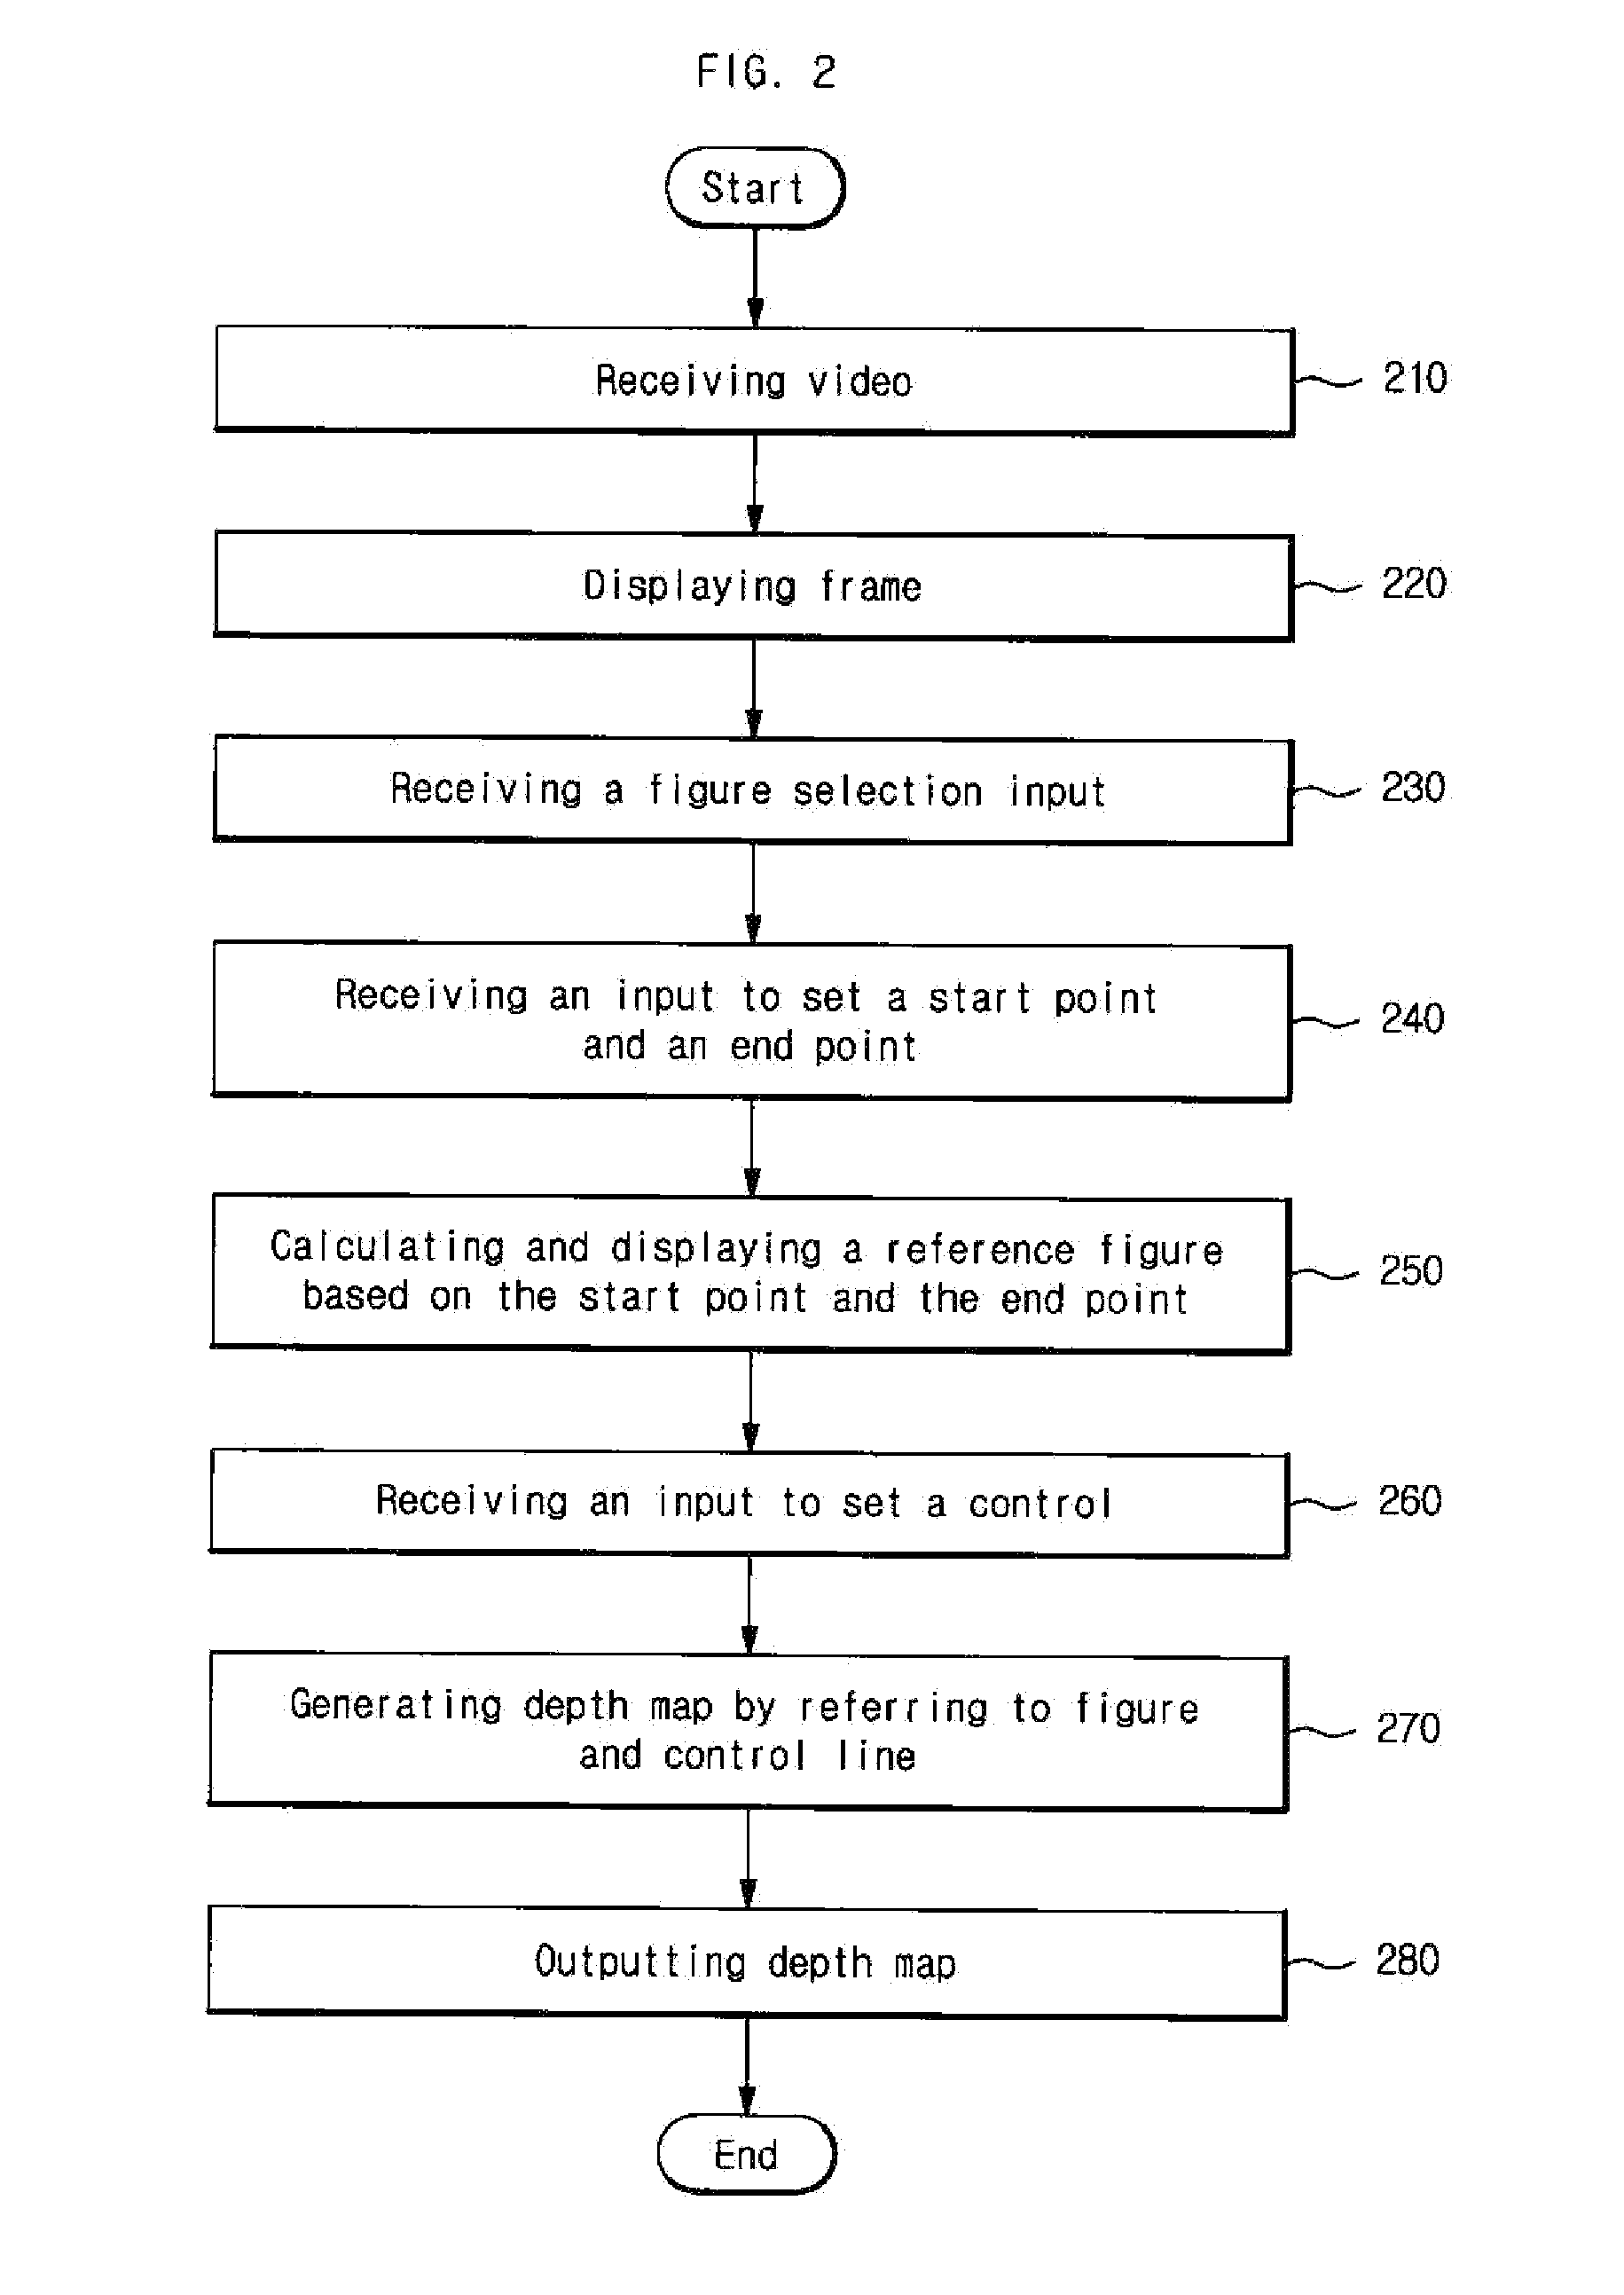 Apparatus and method for generating a depth map